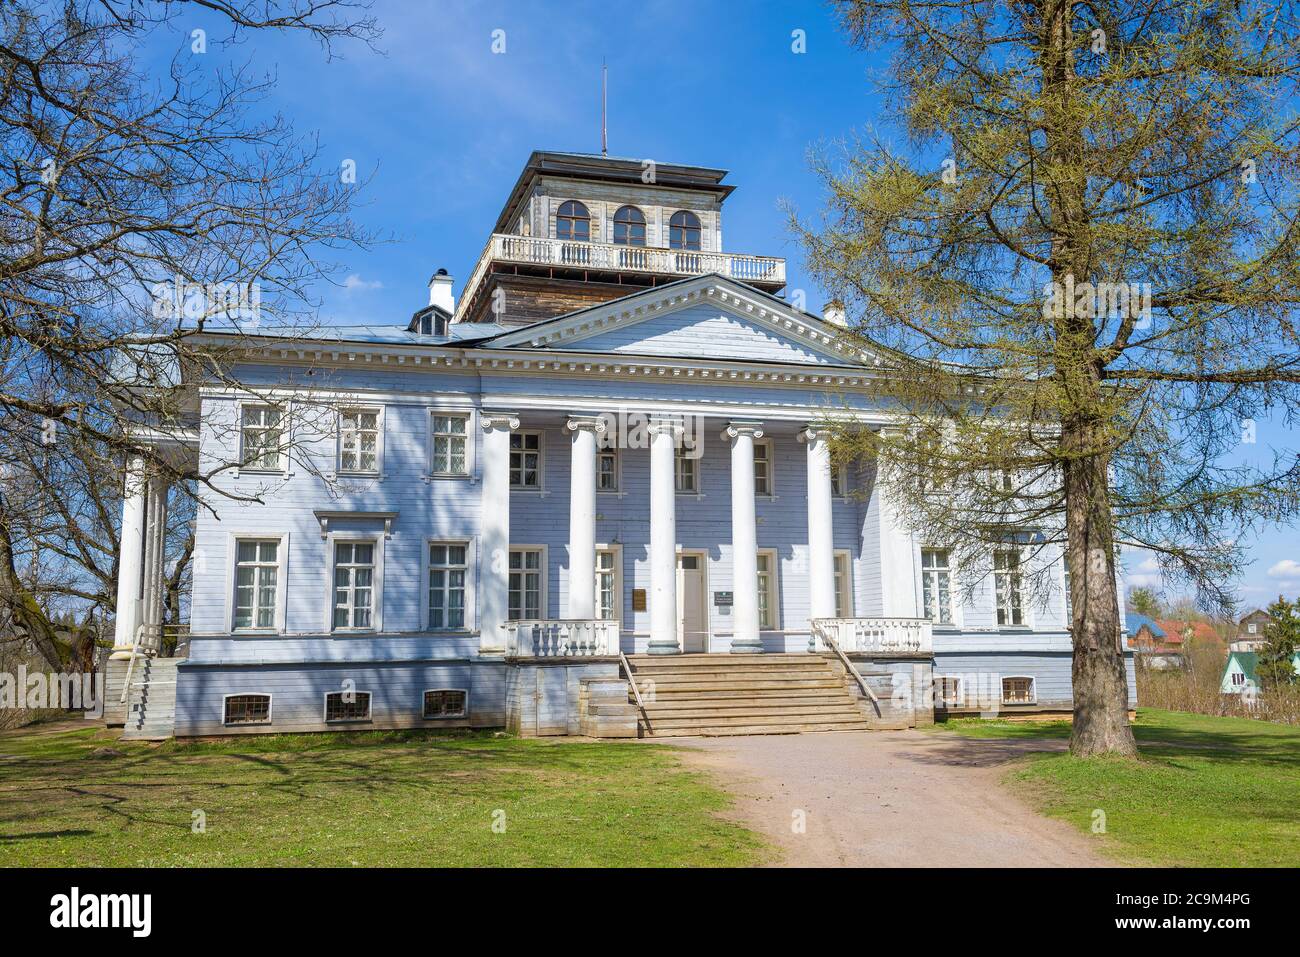 ROZHDESTVENO, RUSSIA - MAY 05, 2020: the Old main building of the estate of the Russian writer V. V. Nabokov in the Rozhdestveno on a Sunny may day Stock Photo